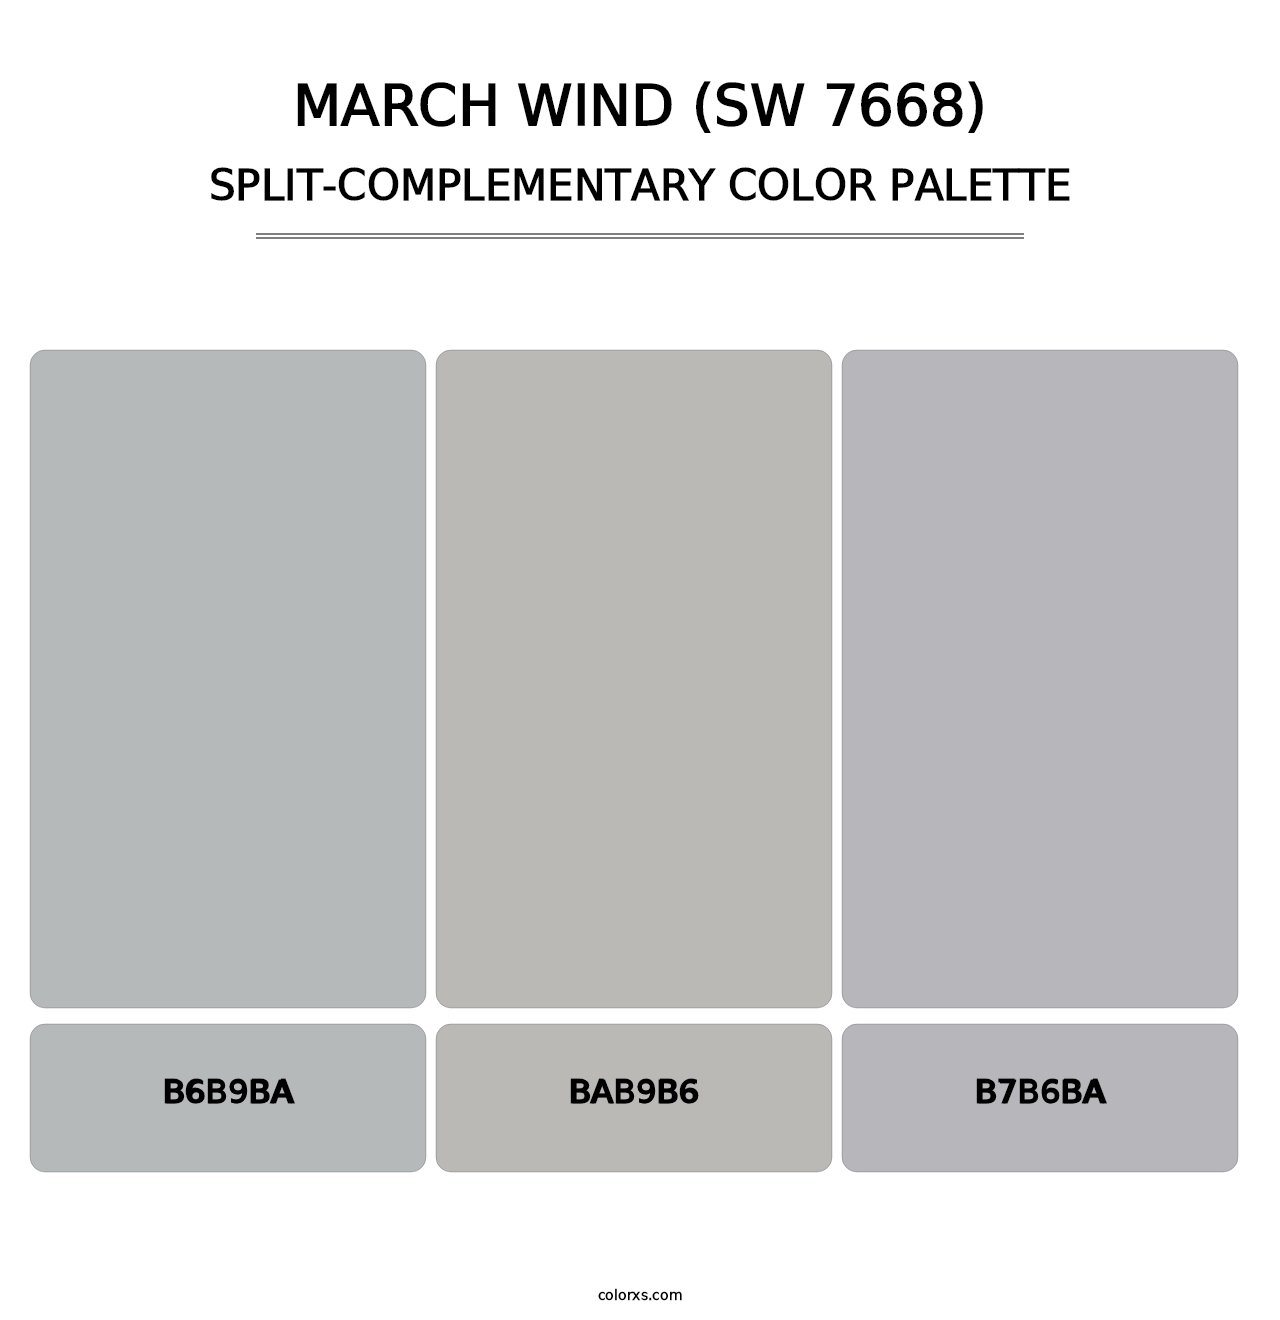 March Wind (SW 7668) - Split-Complementary Color Palette